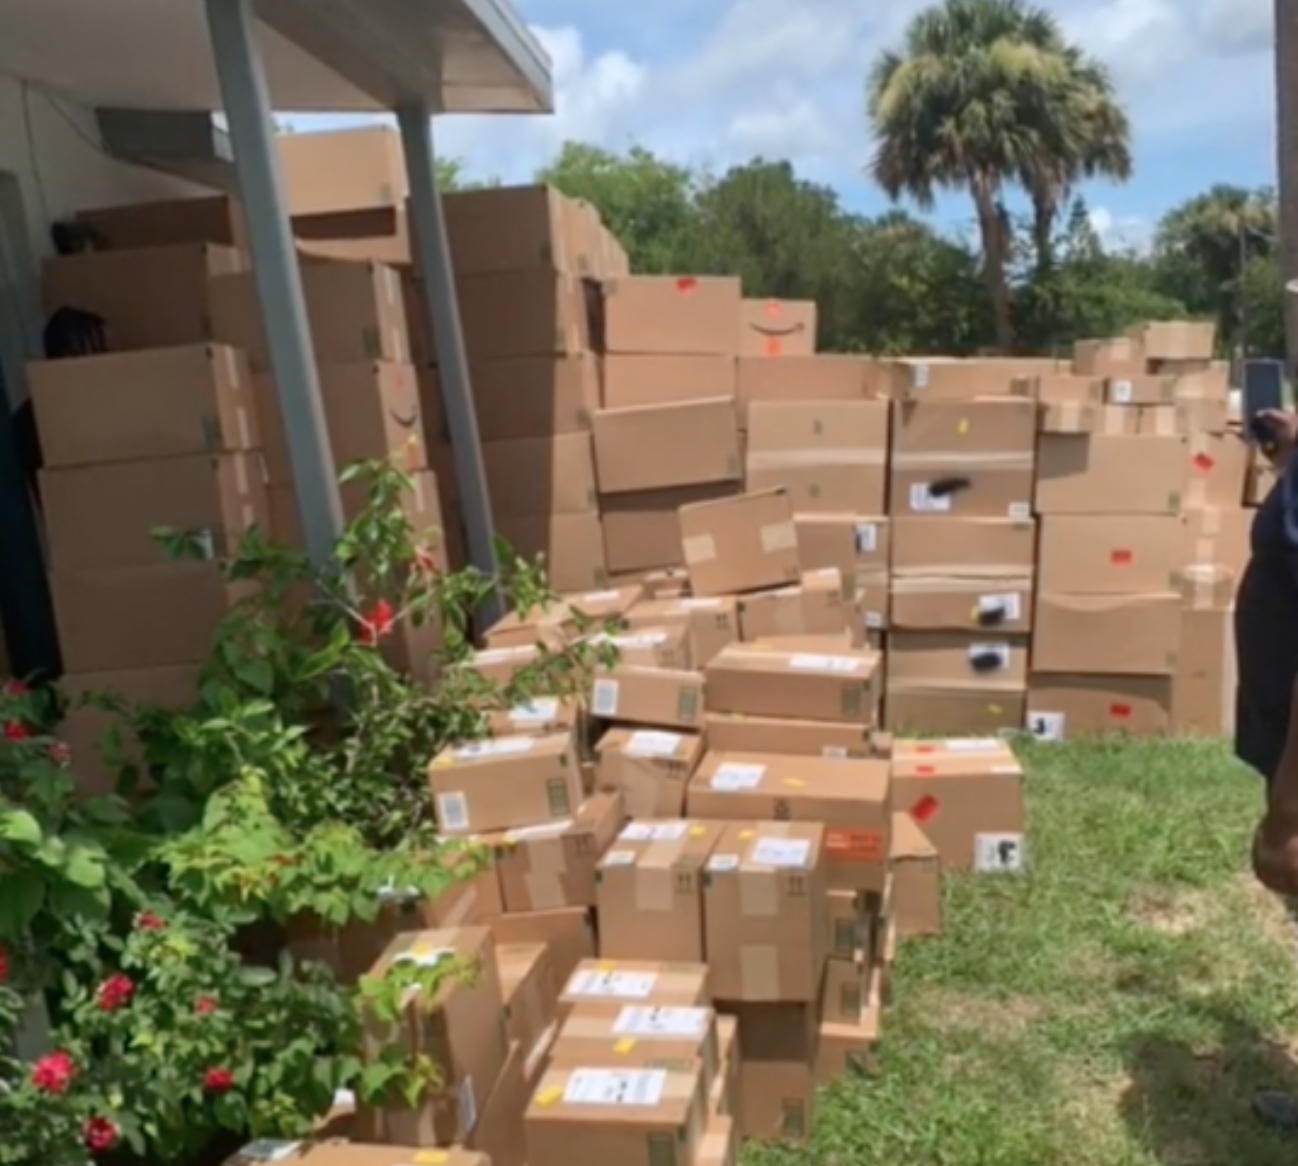 Meanwhile on TikTok: Amazon Delivery Turns One Florida Shopper into Instant Hoarder (And We Thought Our Shopping Habits Were Bad)